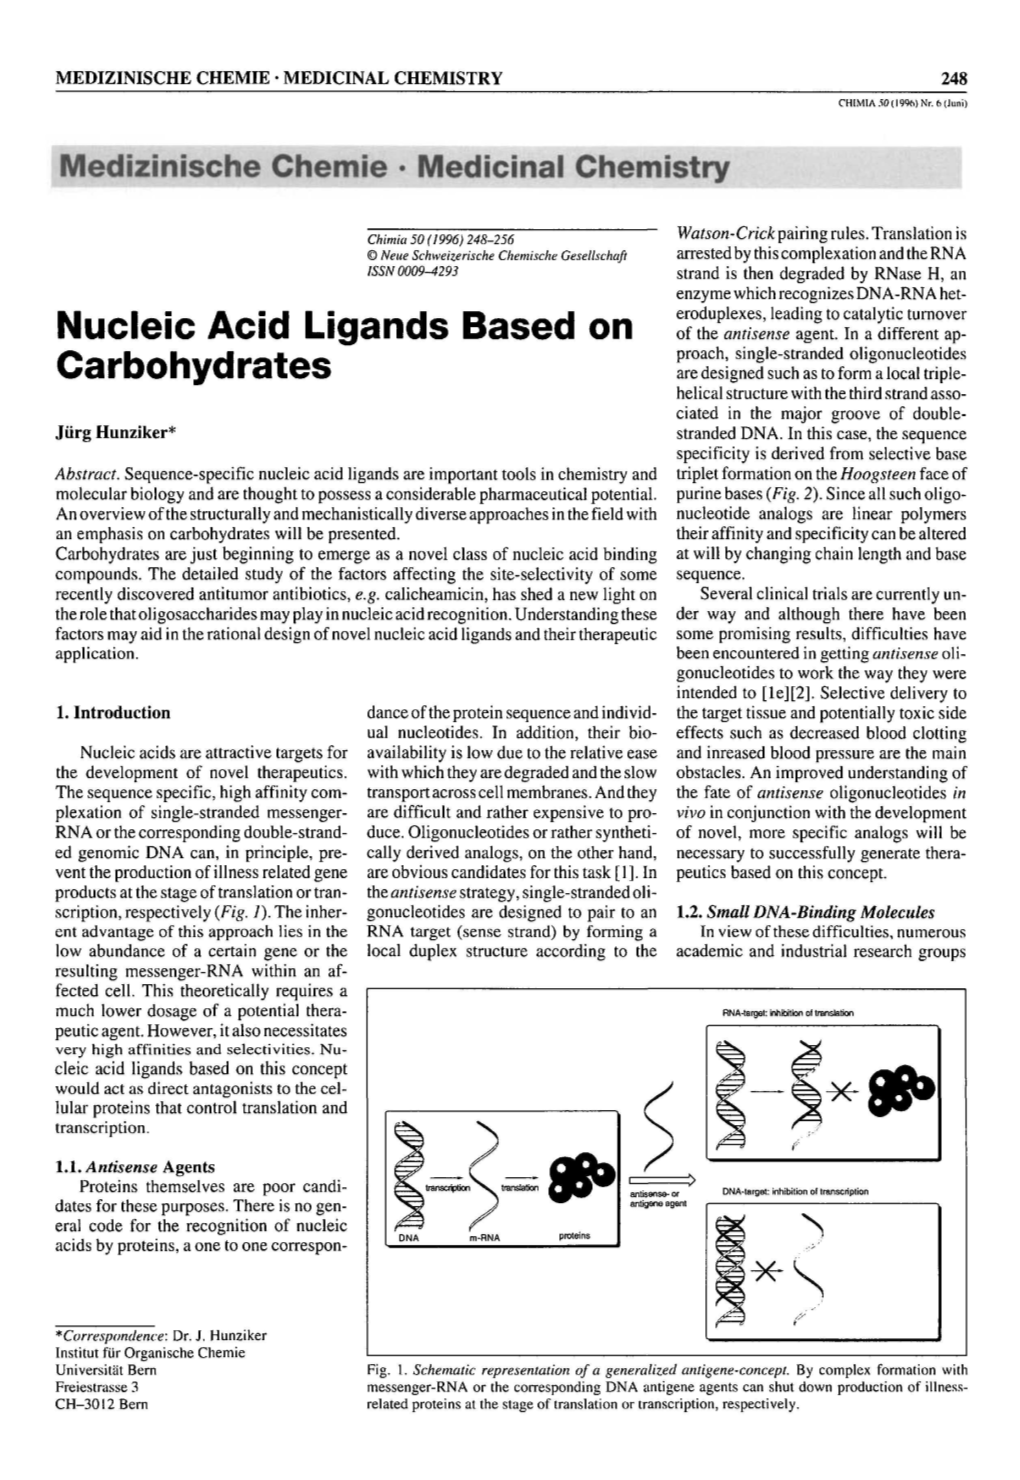 Nucleic Acid Ligands Based on Carbohydrates